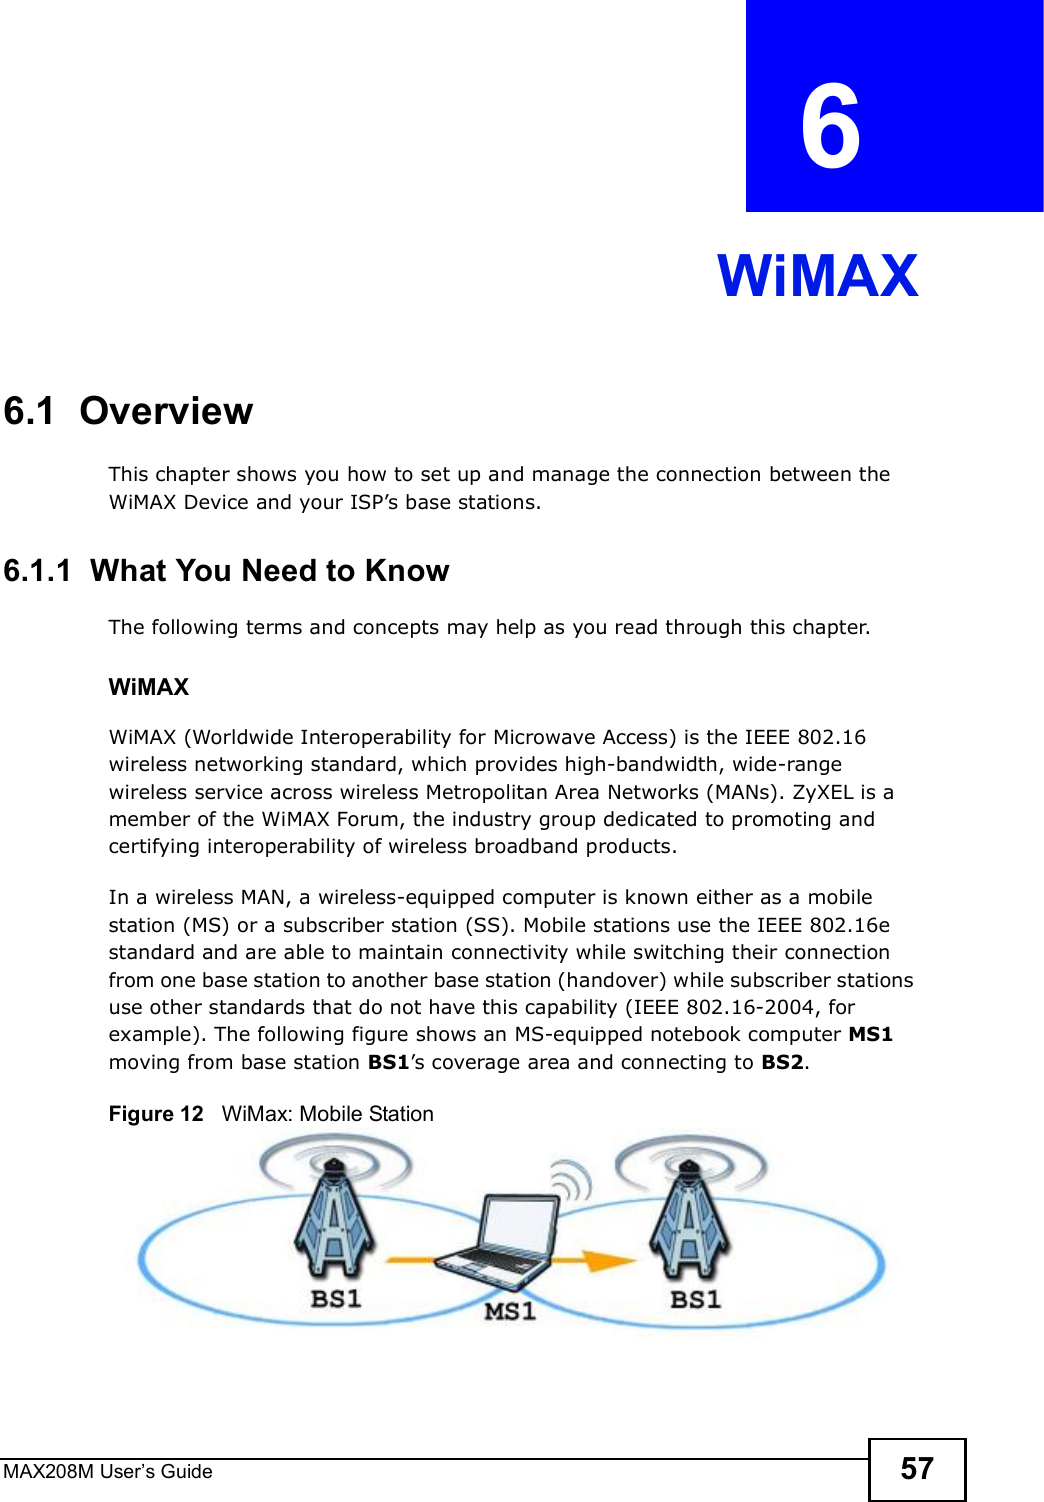 MAX208M User s Guide 57CHAPTER  6 WiMAX6.1  OverviewThis chapter shows you how to set up and manage the connection between the WiMAX Device and your ISP s base stations.6.1.1  What You Need to KnowThe following terms and concepts may help as you read through this chapter.WiMAX WiMAX (Worldwide Interoperability for Microwave Access) is the IEEE 802.16 wireless networking standard, which provides high-bandwidth, wide-range wireless service across wireless Metropolitan Area Networks (MANs). ZyXEL is a member of the WiMAX Forum, the industry group dedicated to promoting and certifying interoperability of wireless broadband products.In a wireless MAN, a wireless-equipped computer is known either as a mobile station (MS) or a subscriber station (SS). Mobile stations use the IEEE 802.16e standard and are able to maintain connectivity while switching their connection from one base station to another base station (handover) while subscriber stations use other standards that do not have this capability (IEEE 802.16-2004, for example). The following figure shows an MS-equipped notebook computer MS1 moving from base station BS1 s coverage area and connecting to BS2.Figure 12   WiMax: Mobile Station